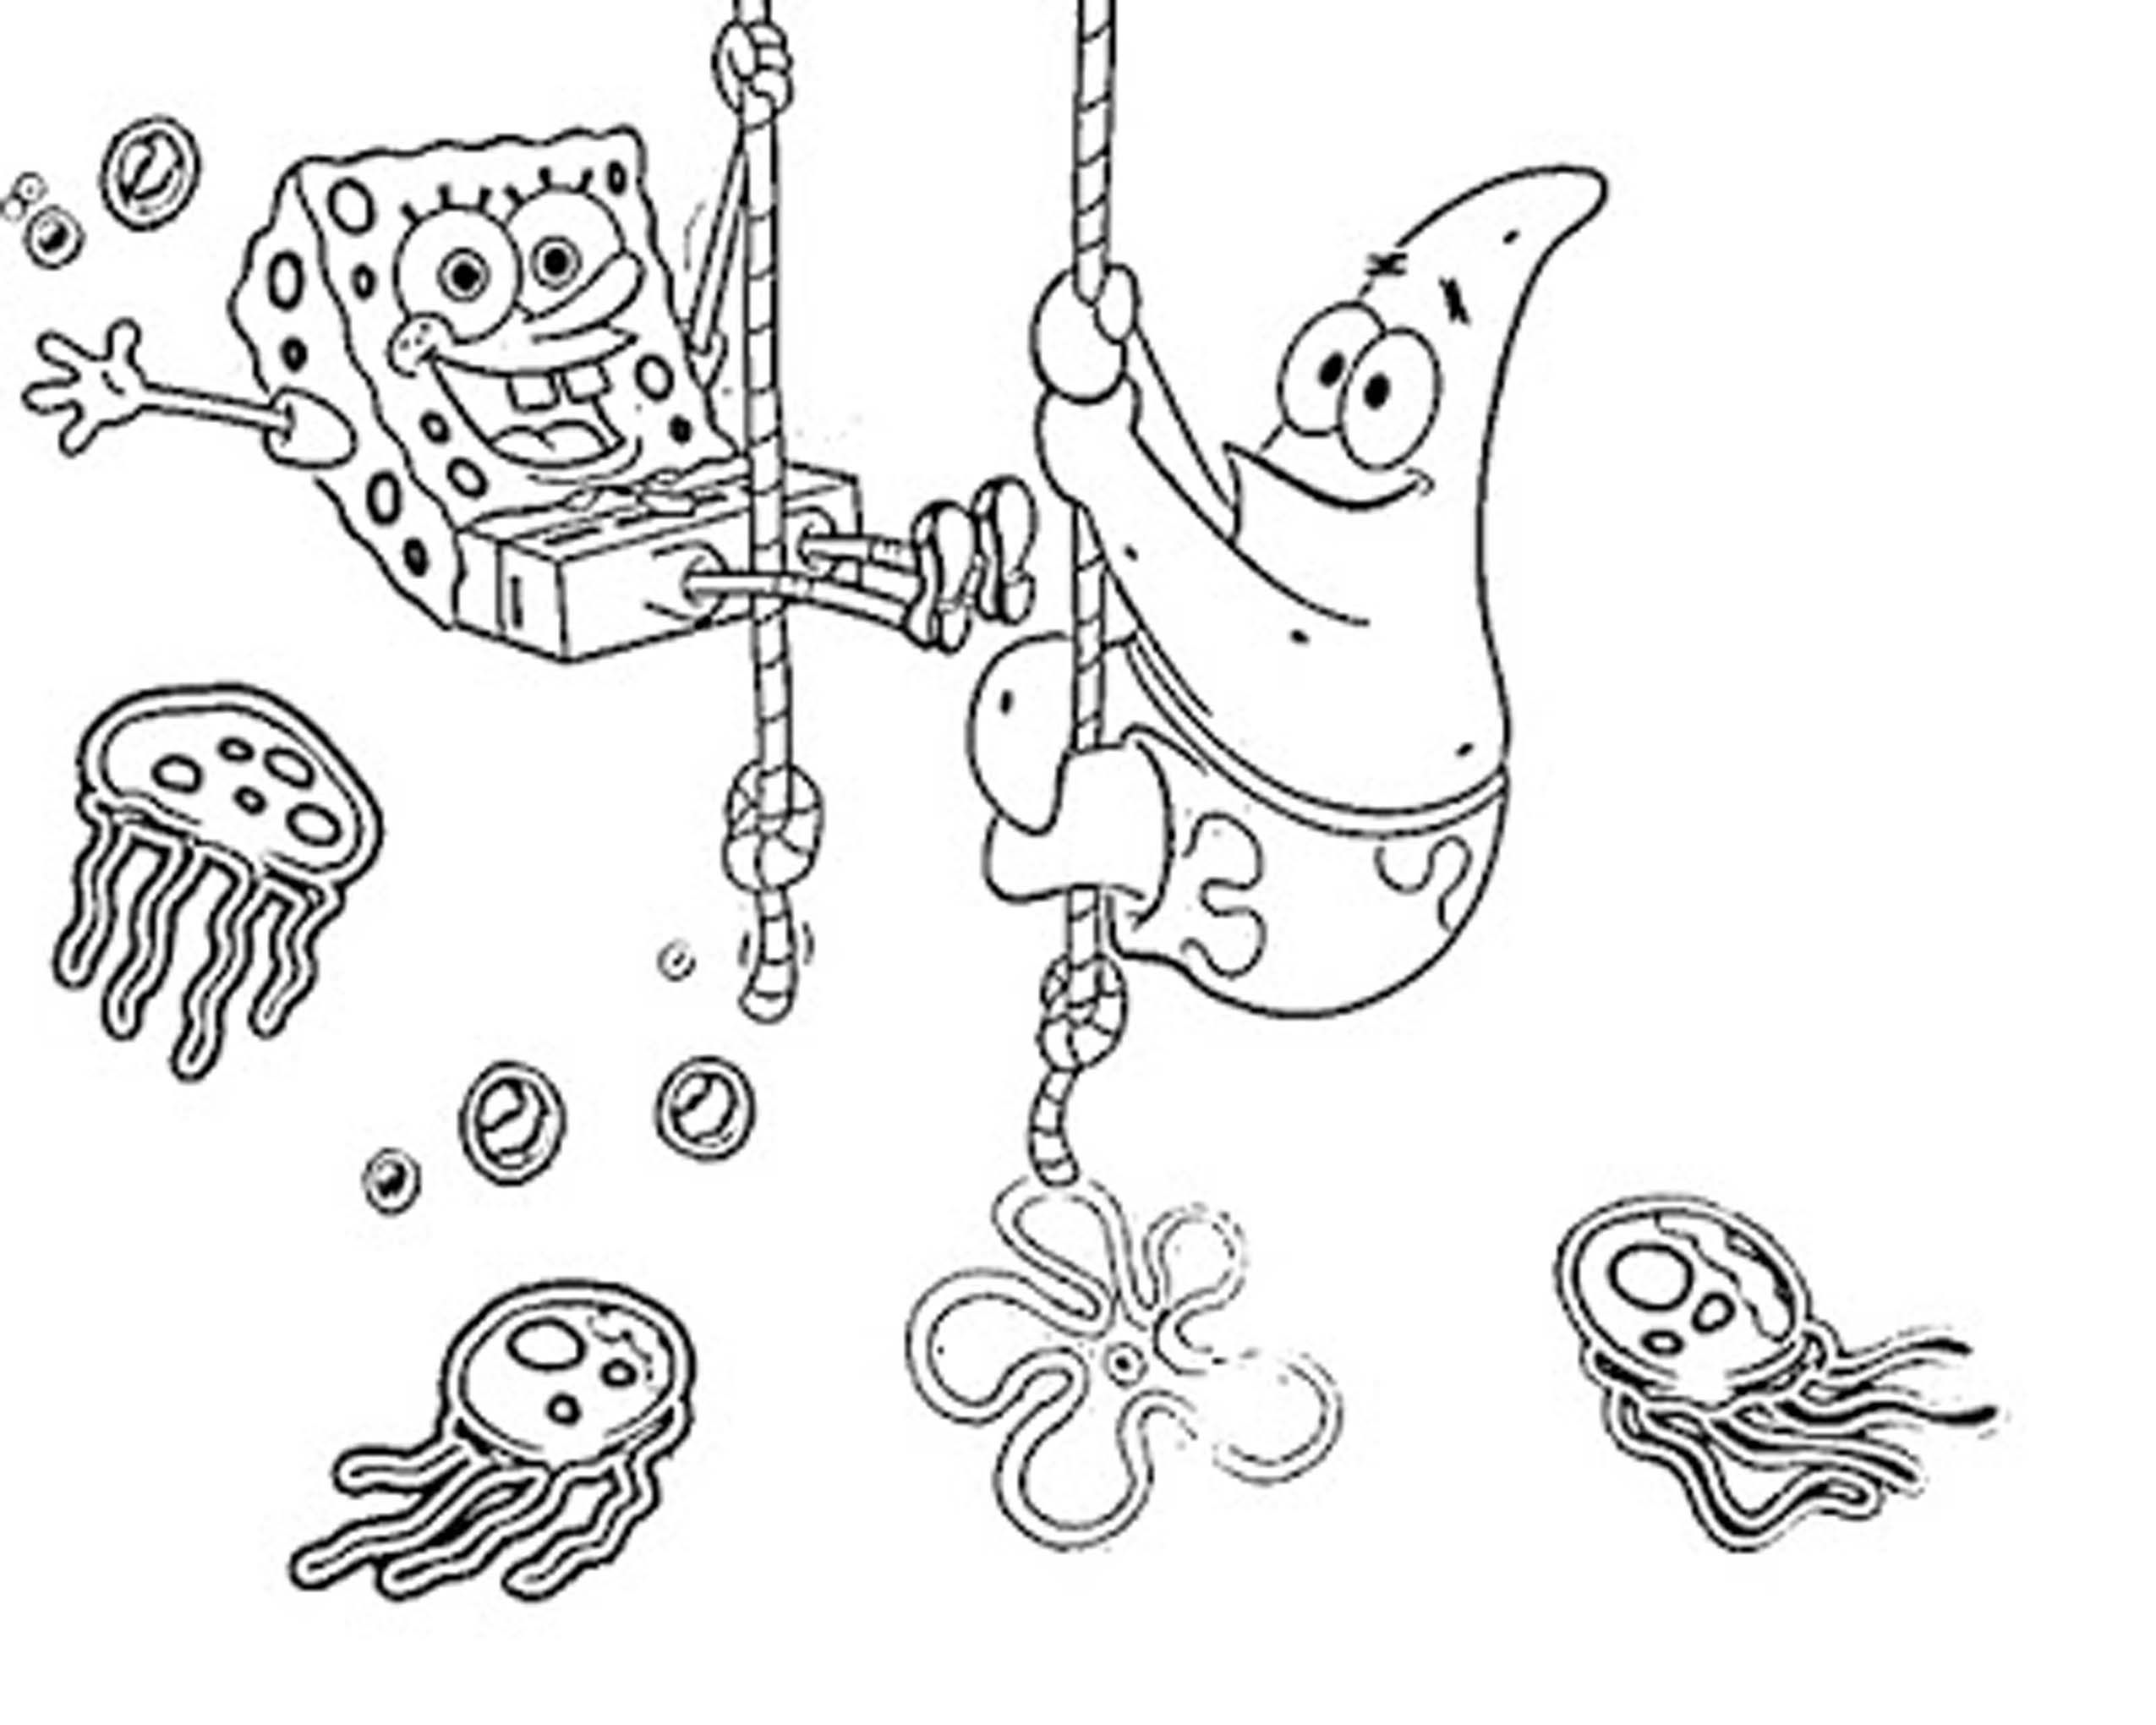 Cool Spongebob Characters 48 Coloring Page